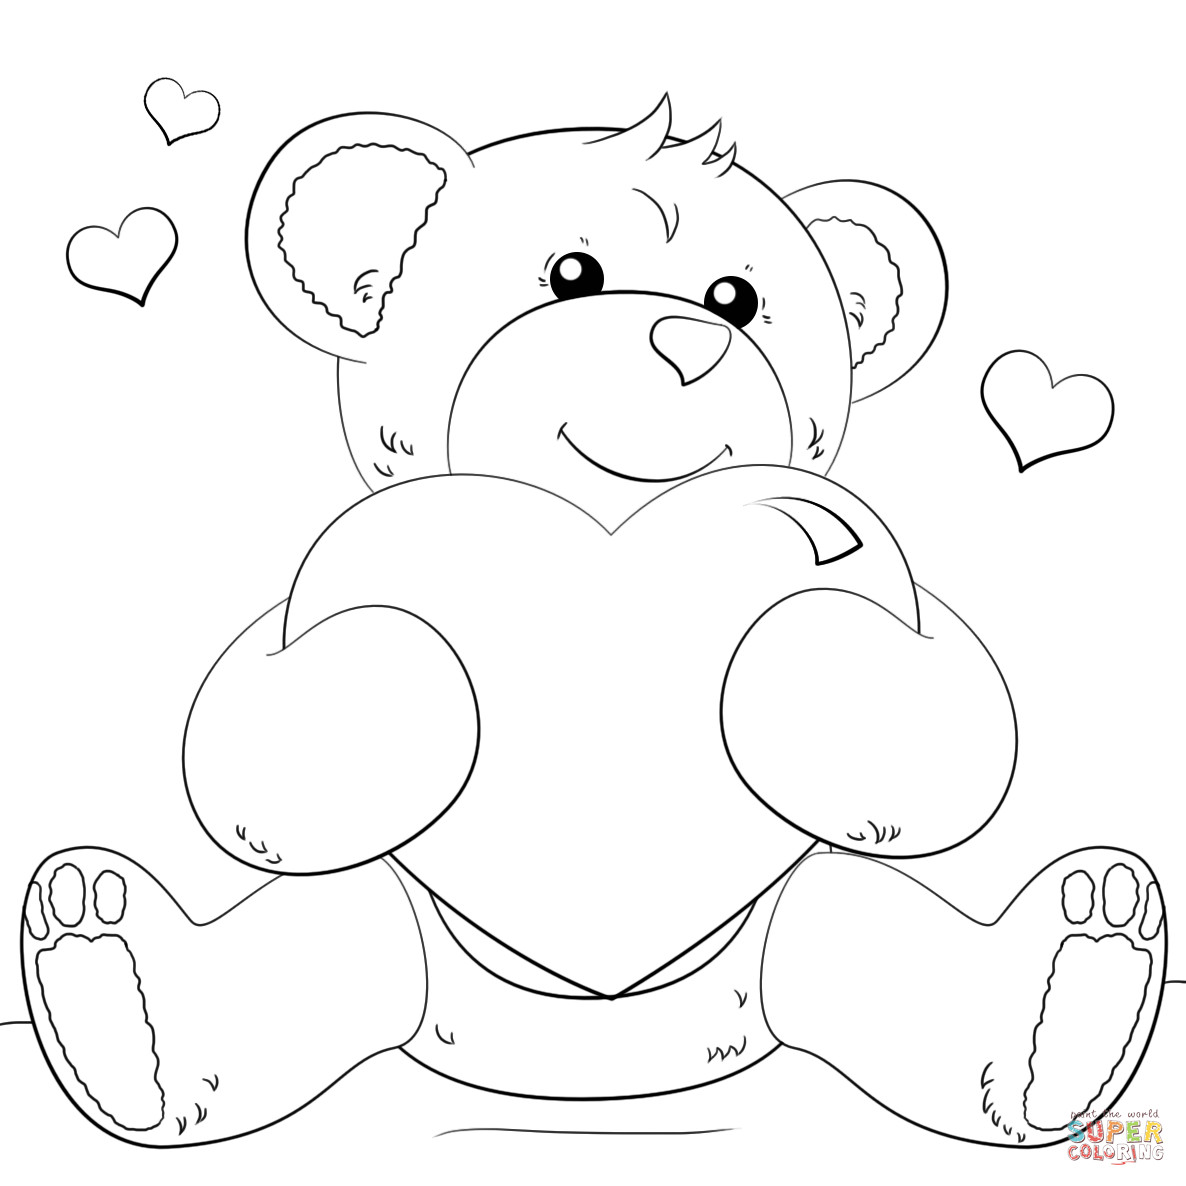 Heart Printable Coloring Pages
 Cute Bear with Heart coloring page